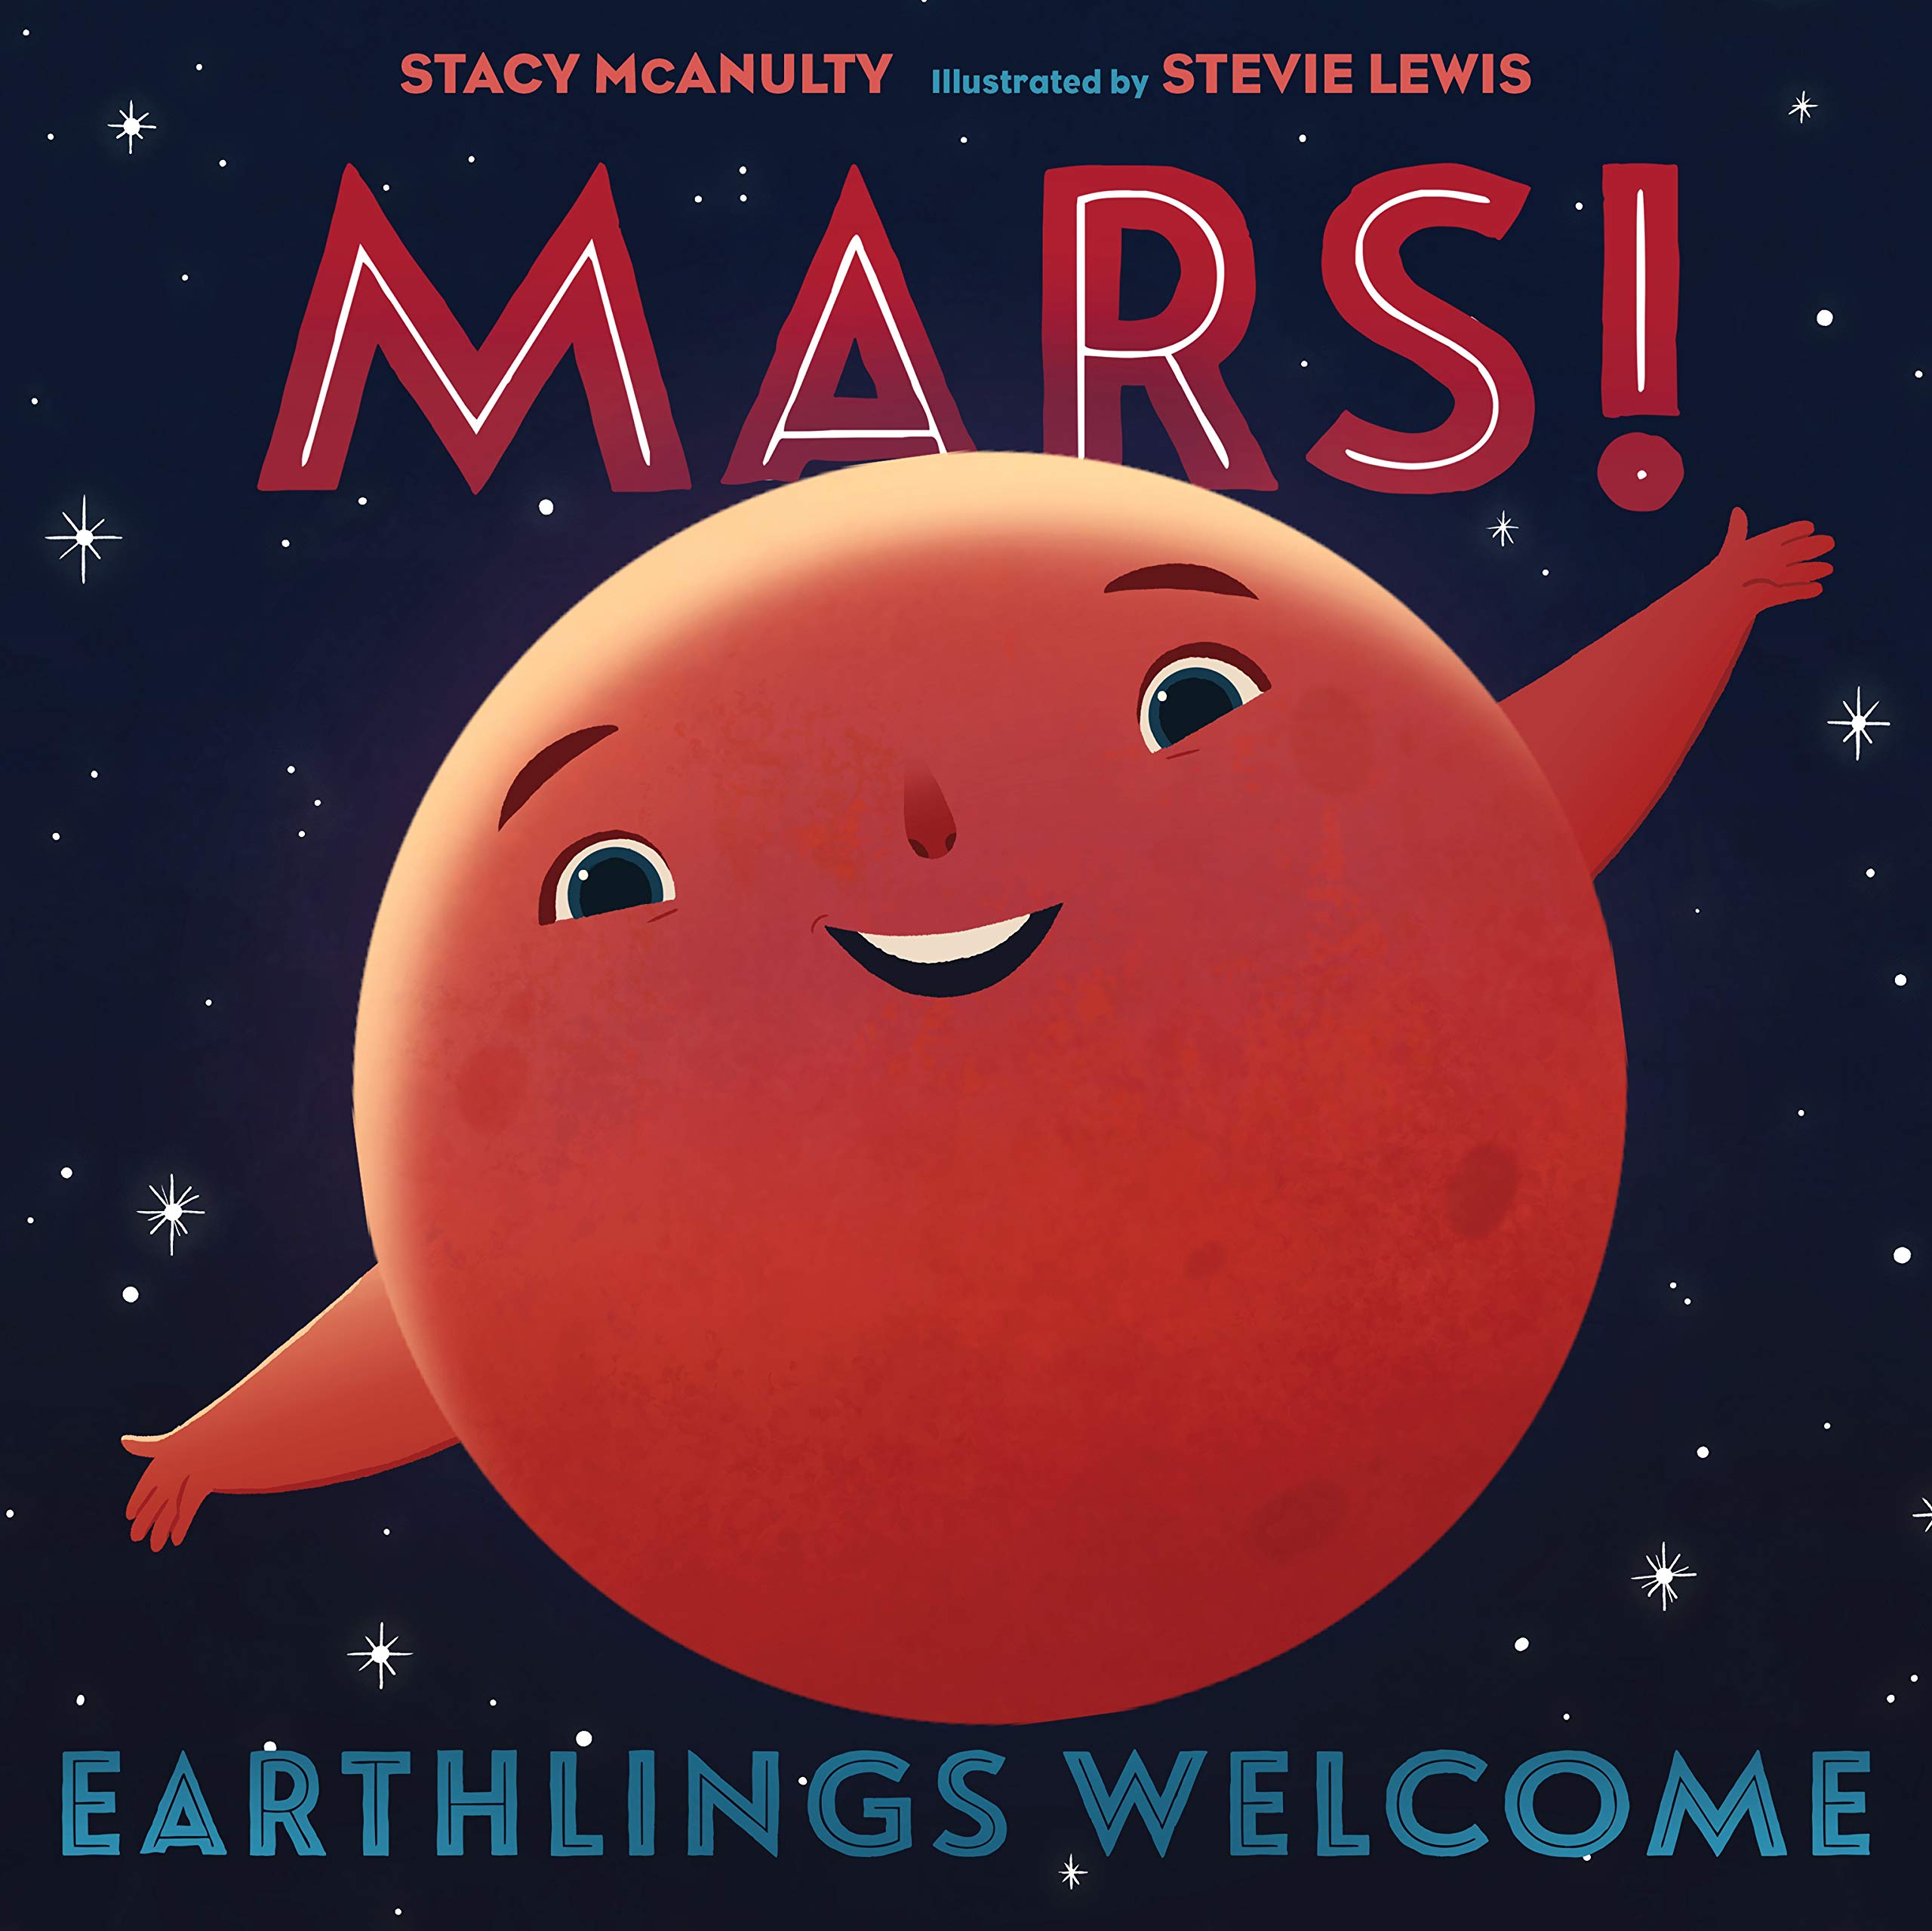 Image for "Mars! Earthlings Welcome"